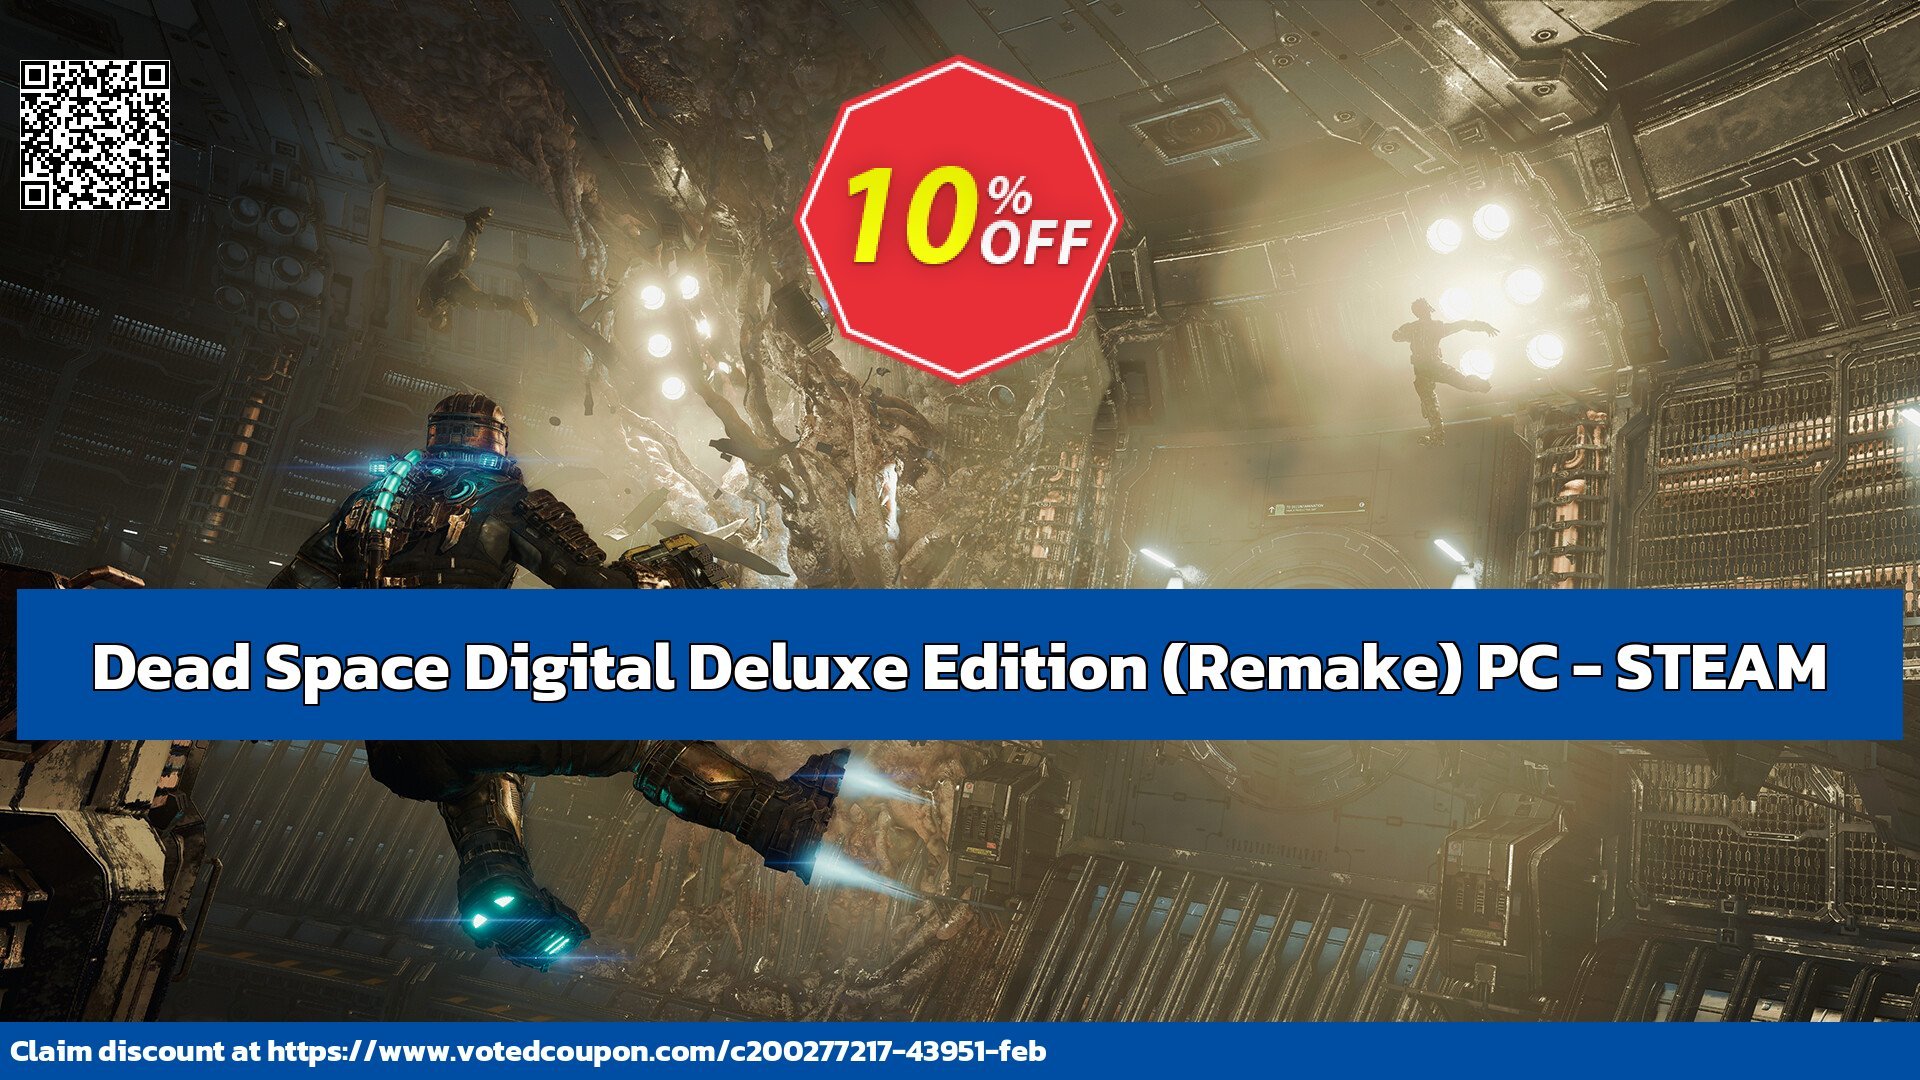 Dead Space Digital Deluxe Edition, Remake PC - STEAM Coupon Code May 2024, 10% OFF - VotedCoupon